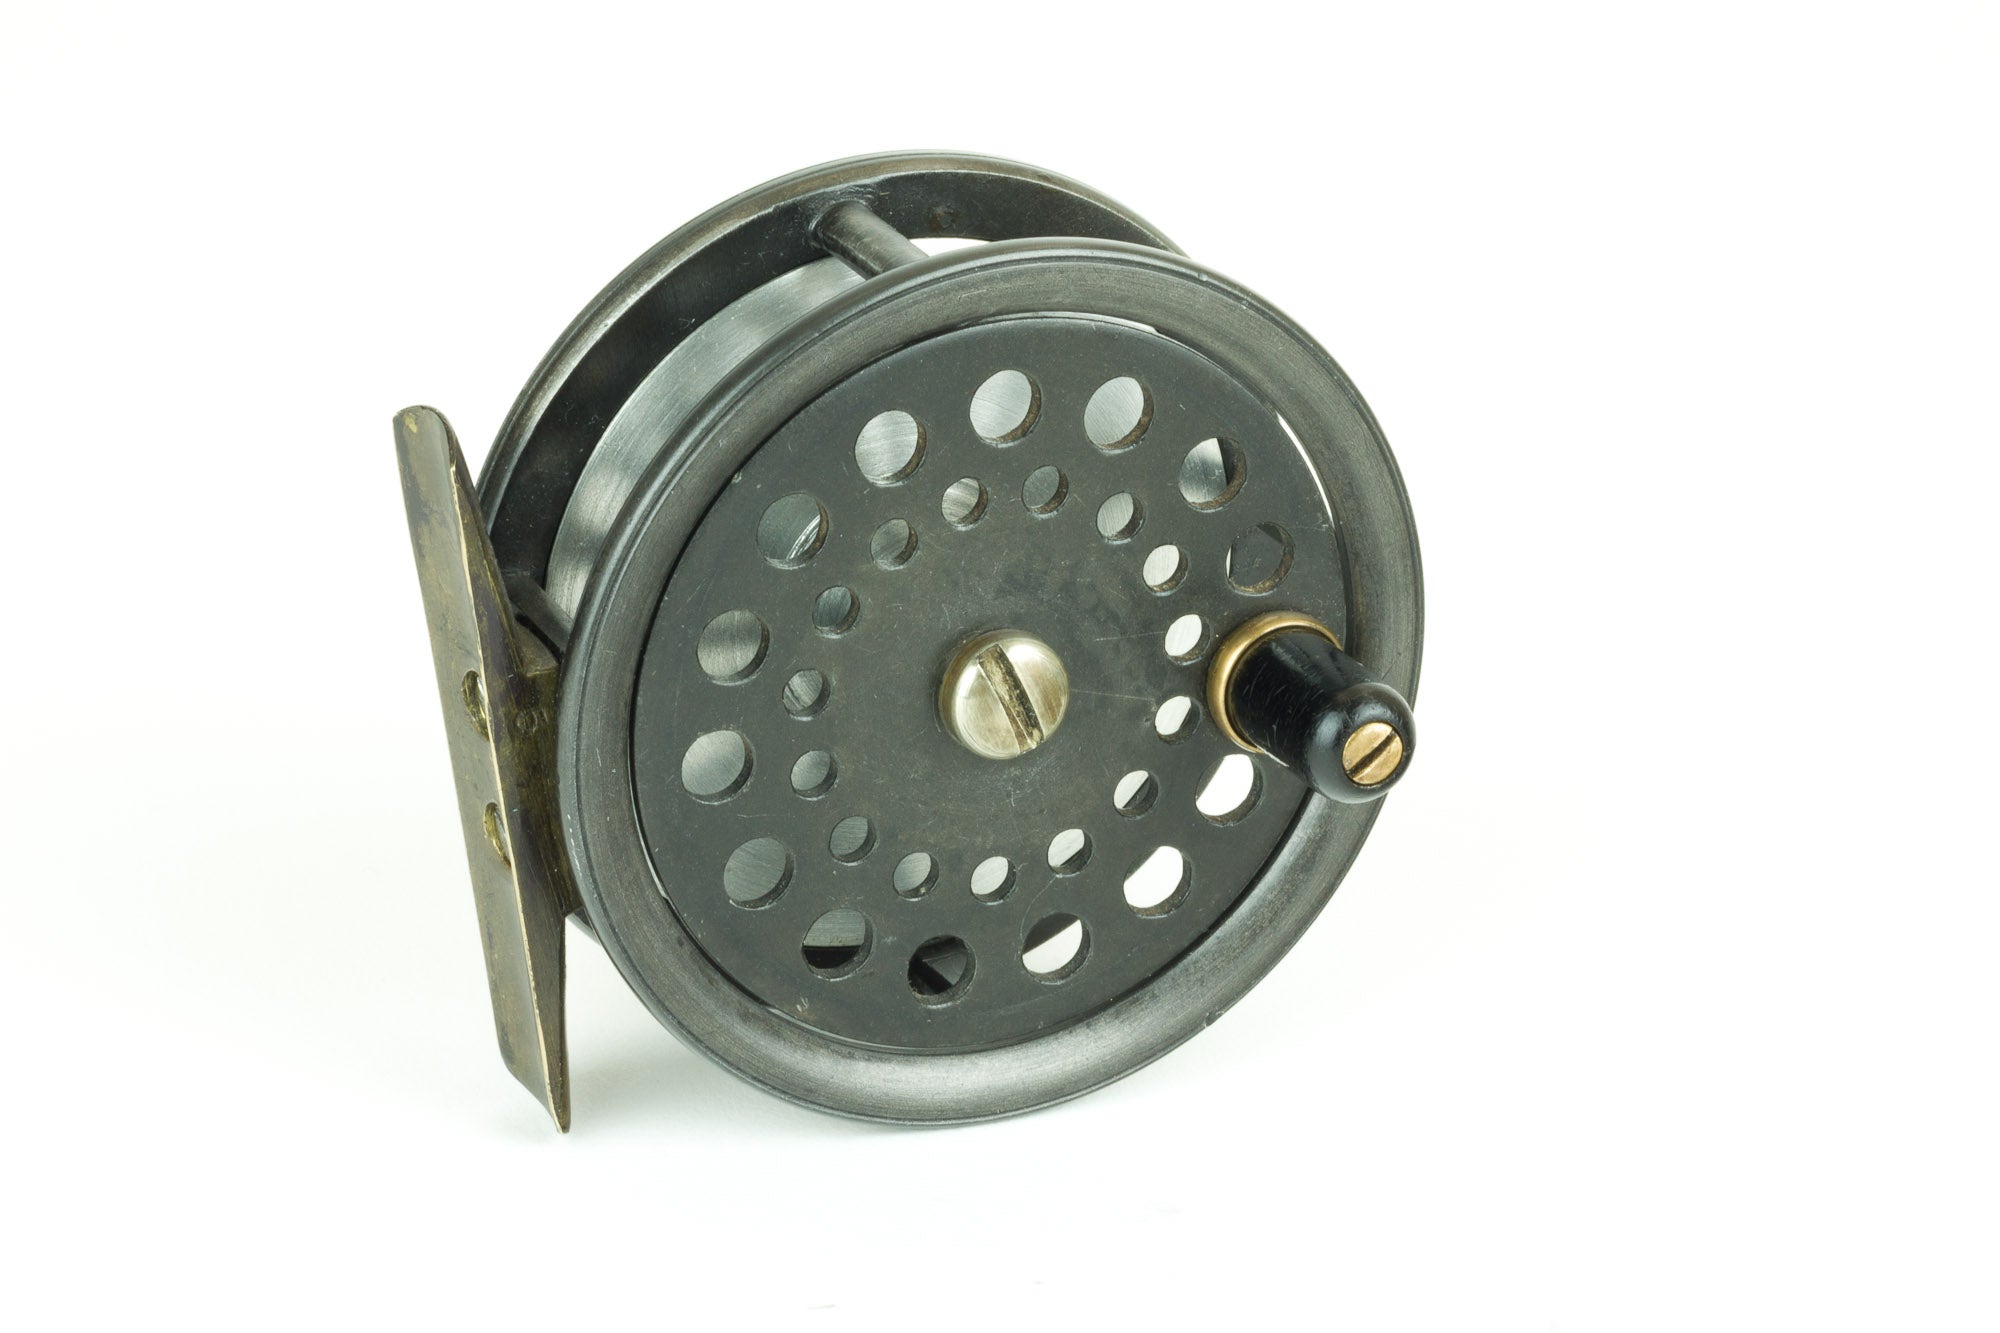 VINTAGE FLY REEL, LL Bean Aquis 5/6, w/ pouch in excellent cond., used  gently $125.00 - PicClick